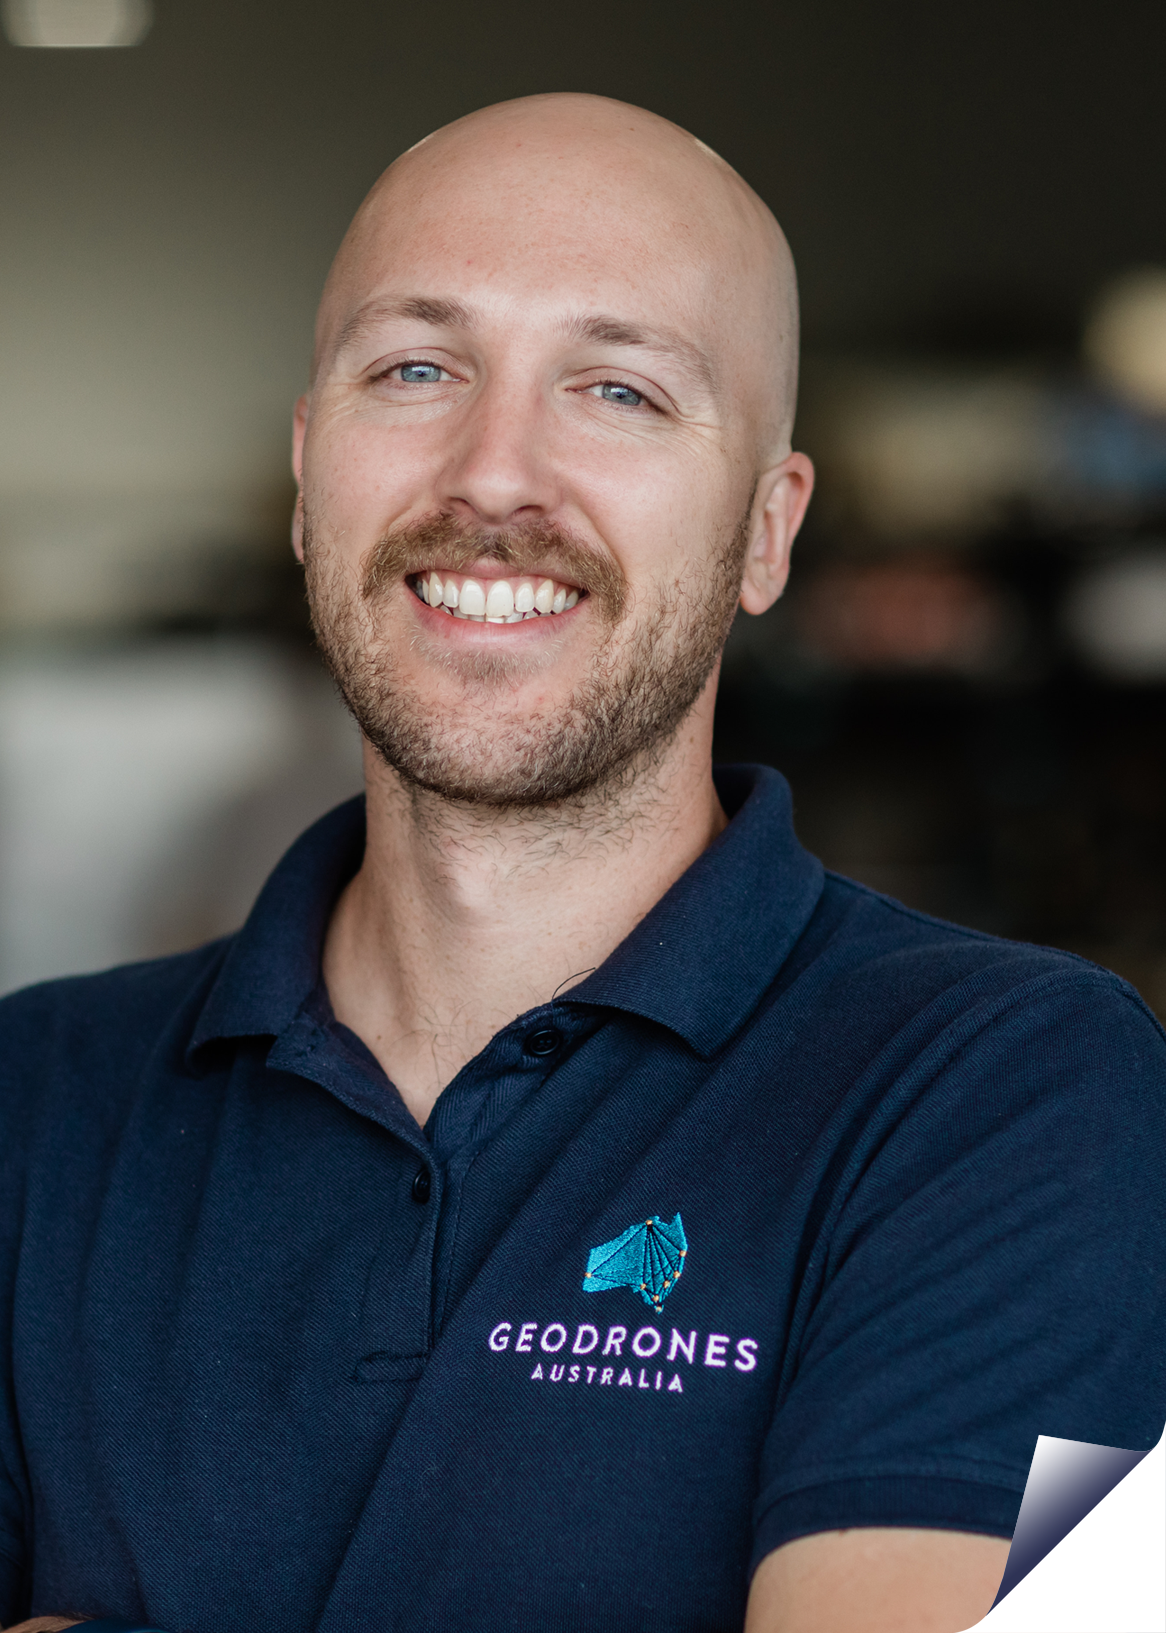 <p style="text-align: center;"><strong>Jonathan Smith</strong></p>
<p>MECHANICAL ENGINEER</p>
<p style="text-align: center;"> Finalising his PhD remotely from the University of Strathclyde, specialising in metal additive manufacturing, Jonathan will apply his experience in mechanical design, manufacturing and engineering management in Geodrones.</p>